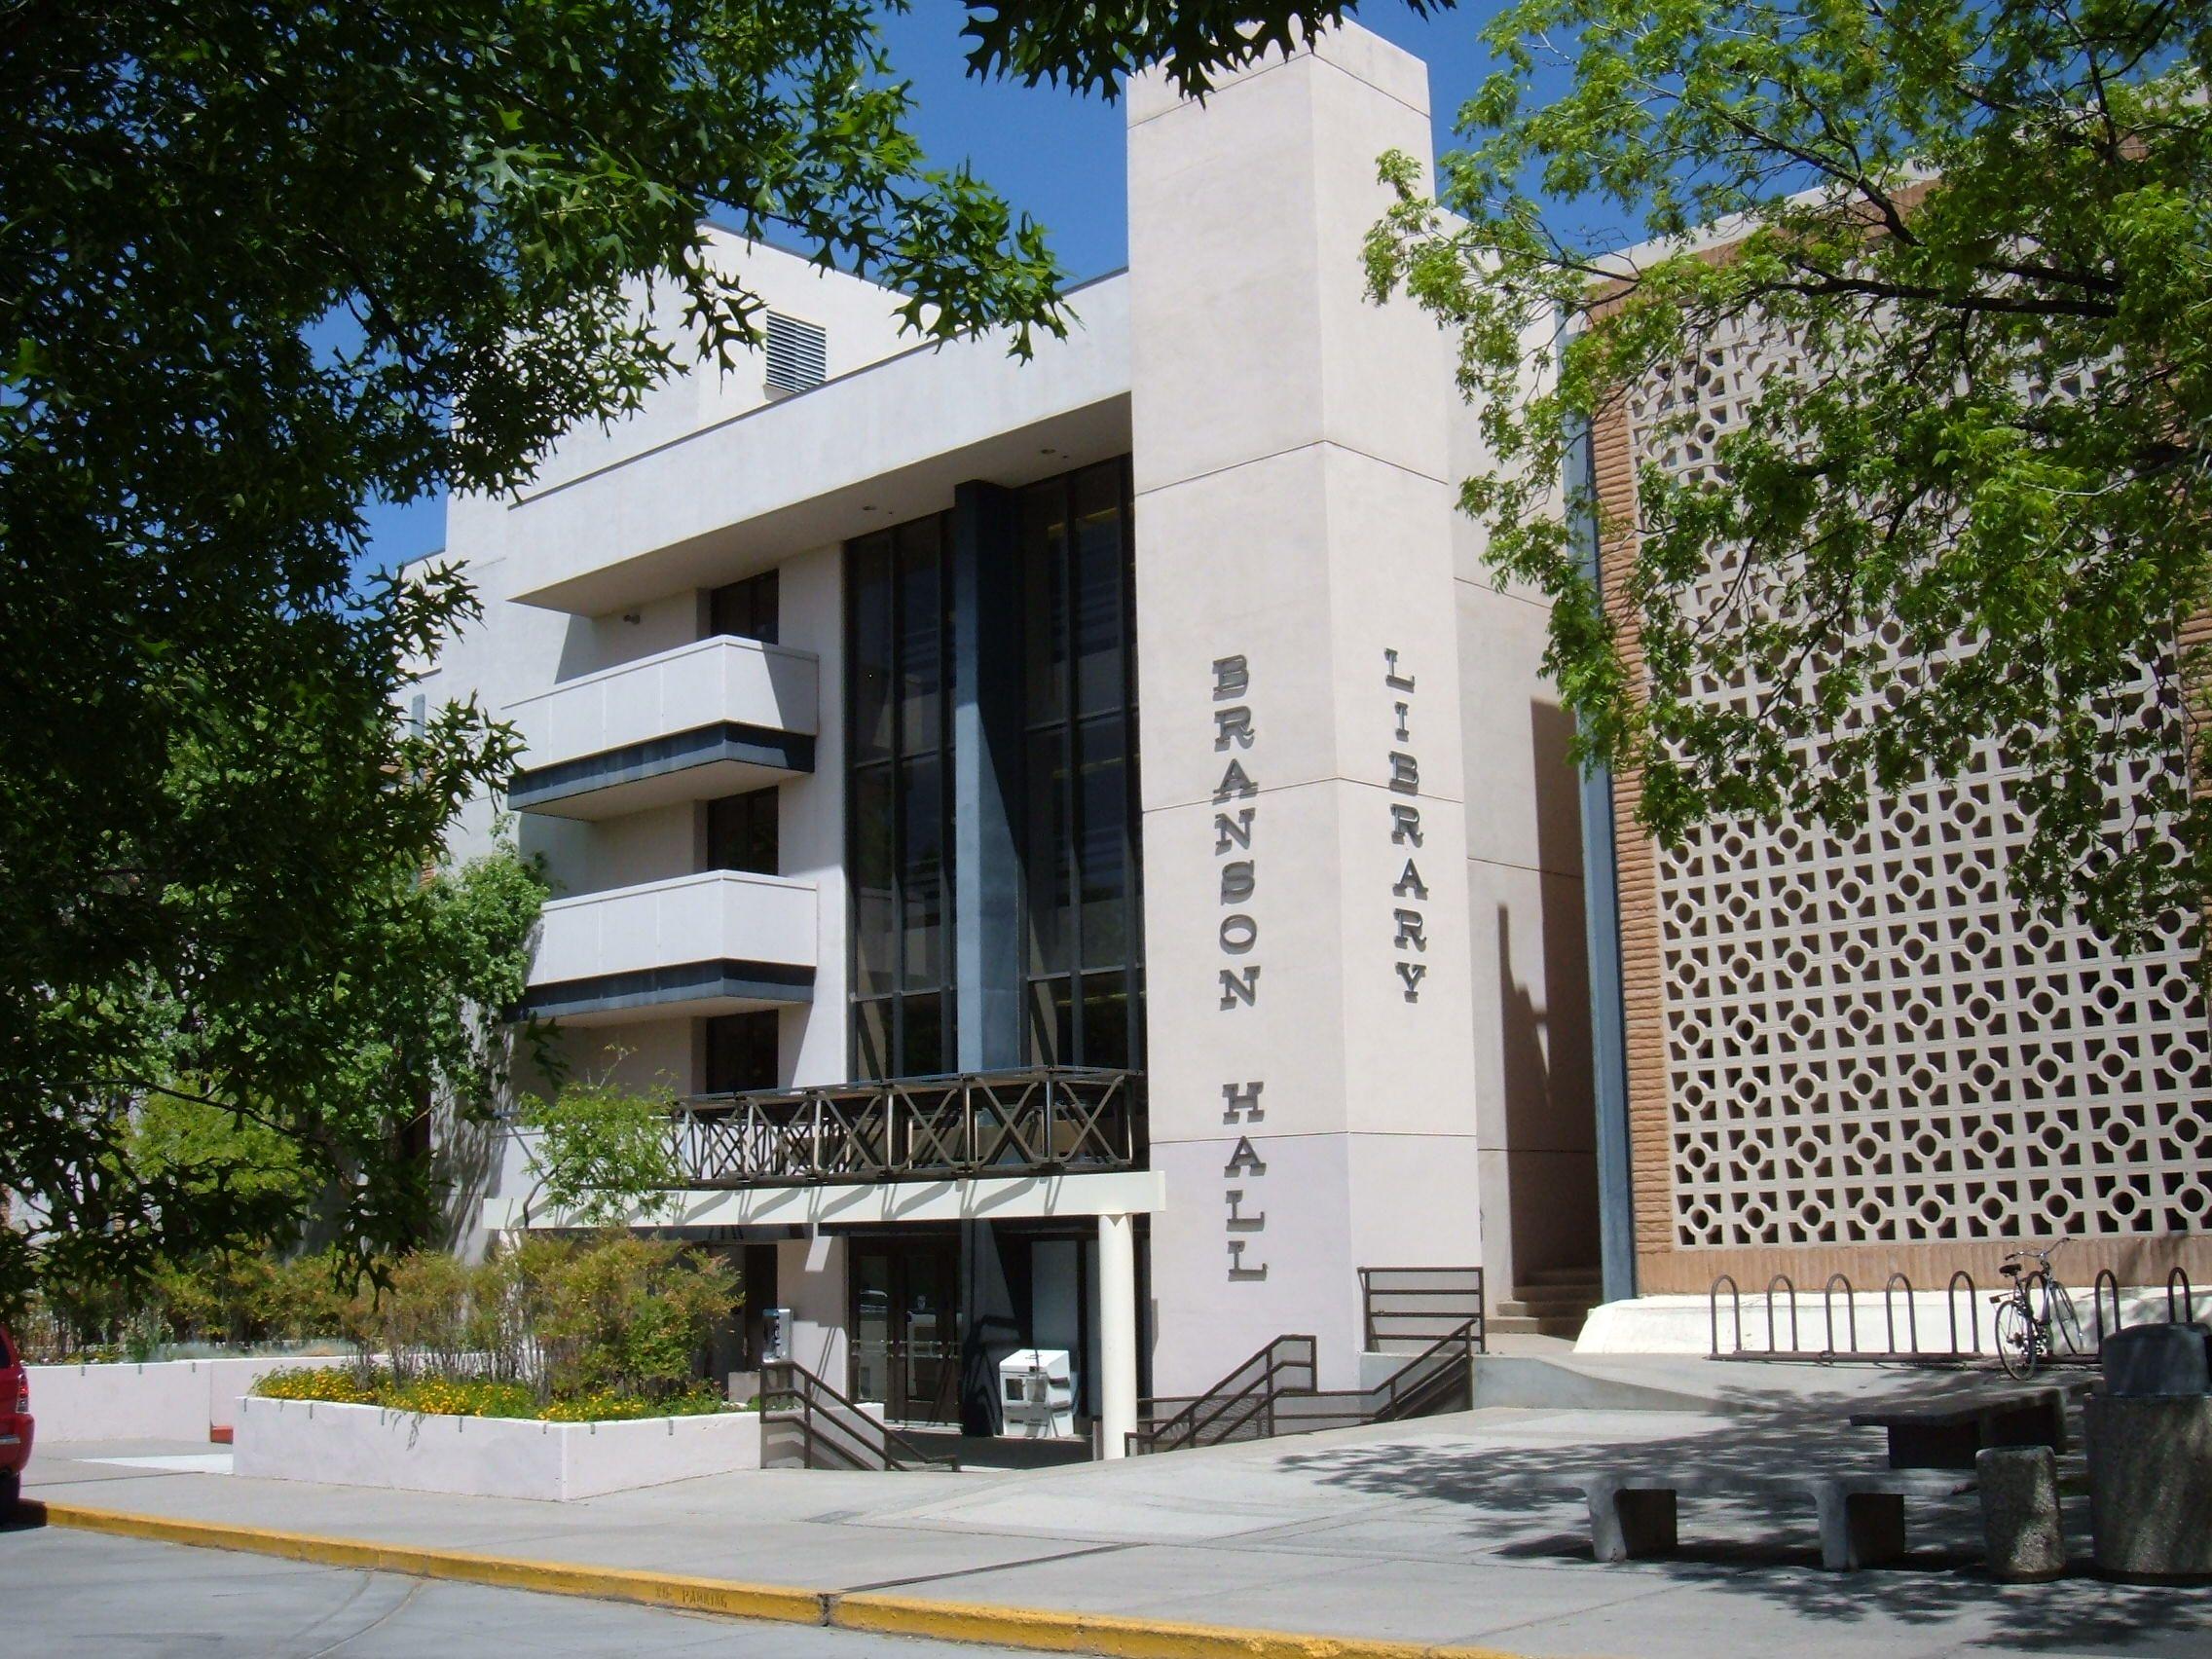 File:Branson Library New Mexico State University Las Cruces.jpg